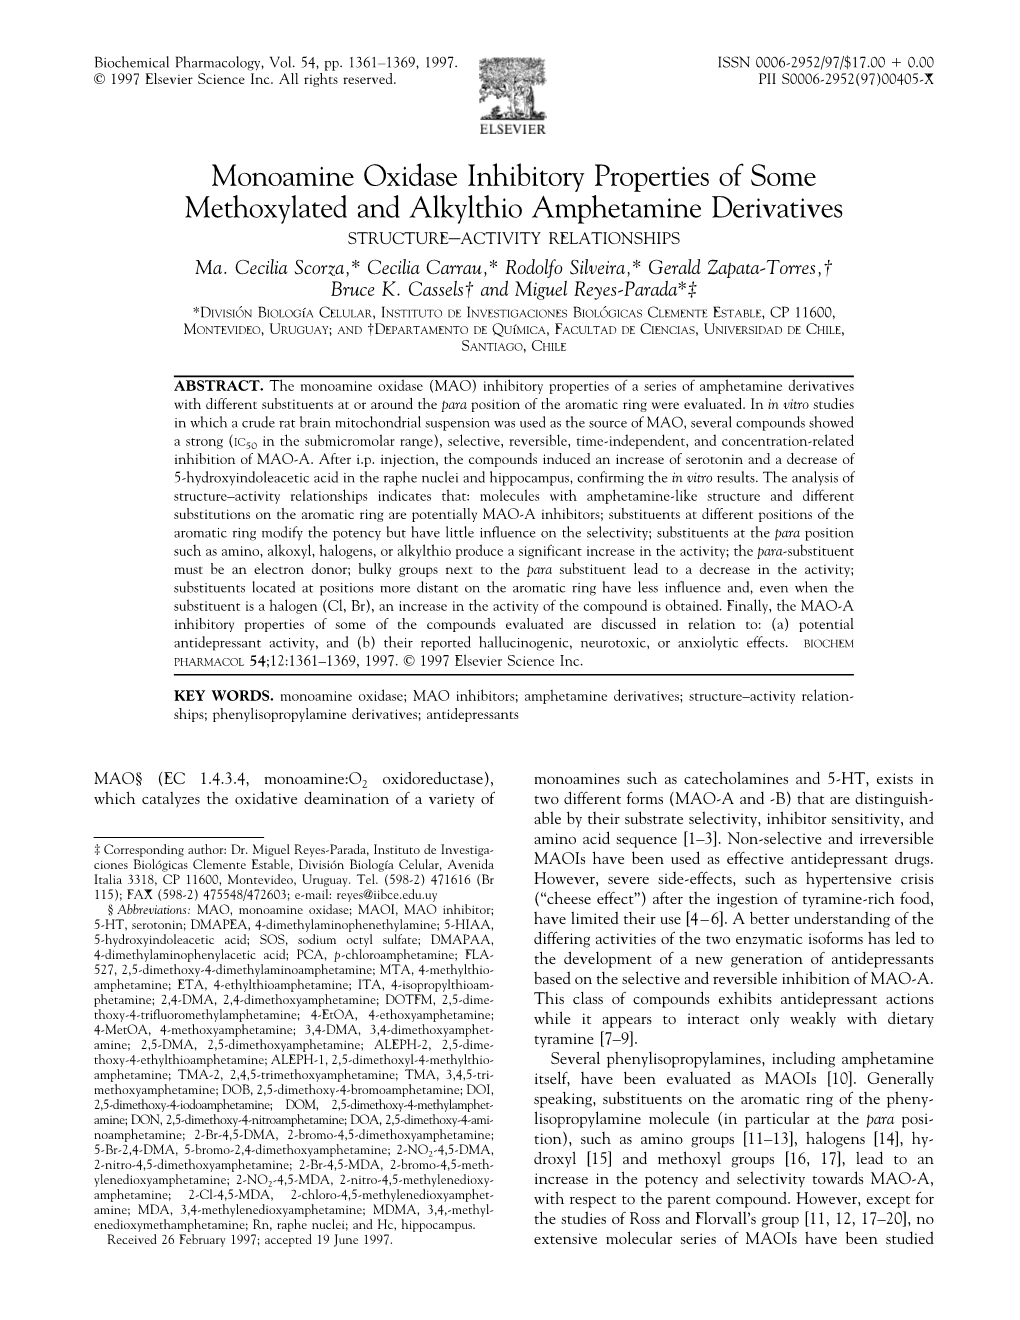 Monoamine Oxidase Inhibitory Properties of Some Methoxylated and Alkylthio Amphetamine Derivatives STRUCTURE–ACTIVITY RELATIONSHIPS Ma